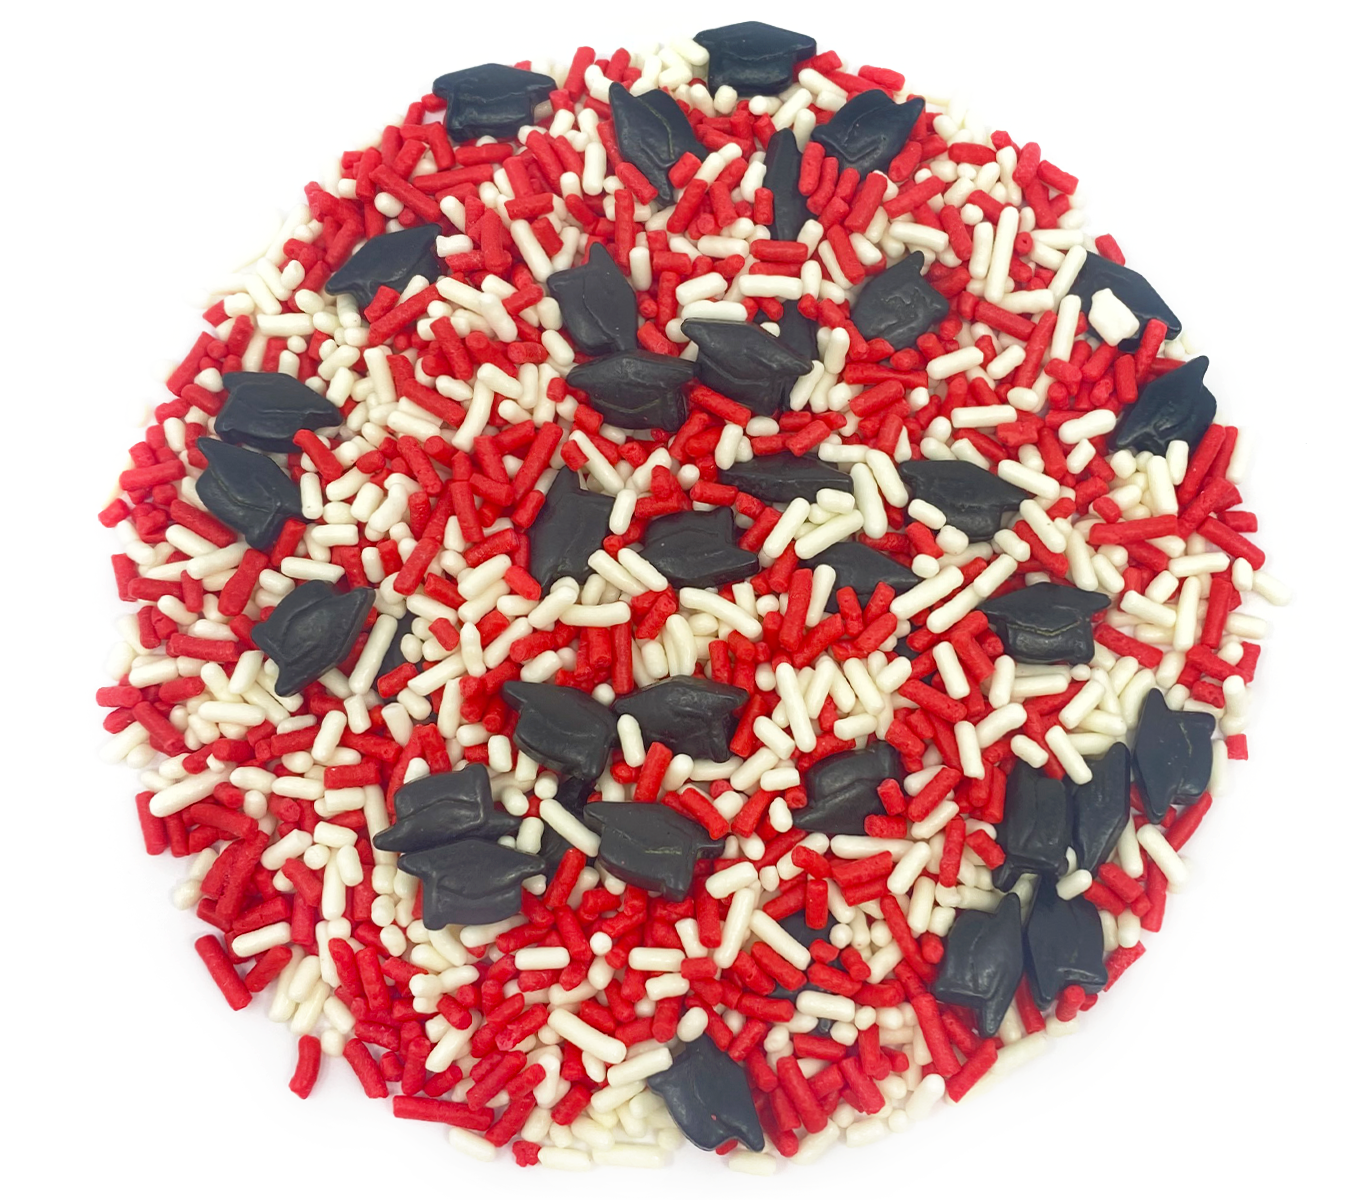 Load image into Gallery viewer, Graduation Day! Red &amp;amp; White Sprinkle Mix 3.8oz
